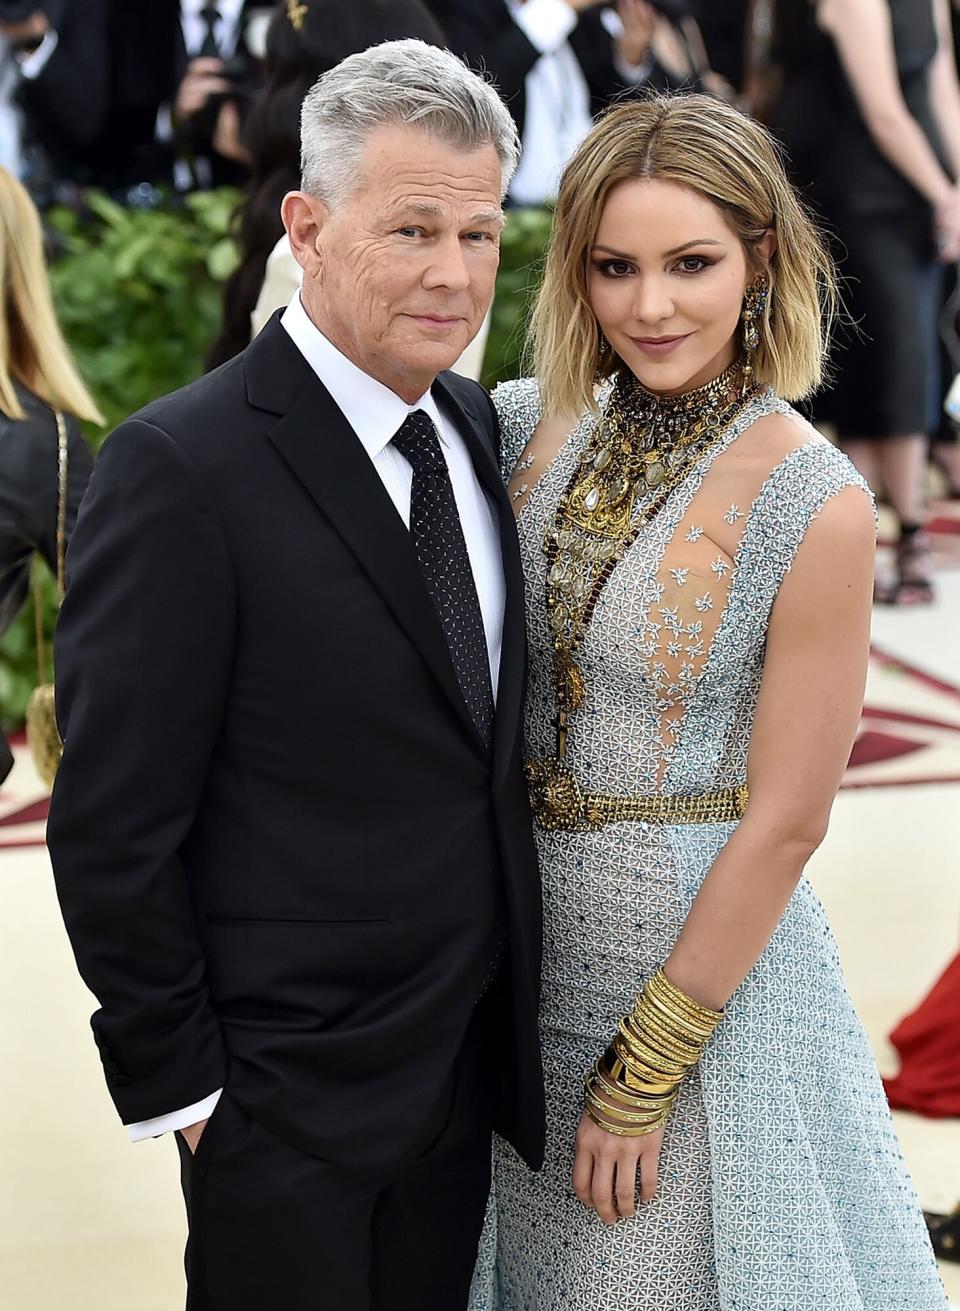 David Foster and Katharine McPhee attend the Heavenly Bodies: Fashion & The Catholic Imagination Costume Institute Gala at The Metropolitan Museum of Art on May 7, 2018 in New York City